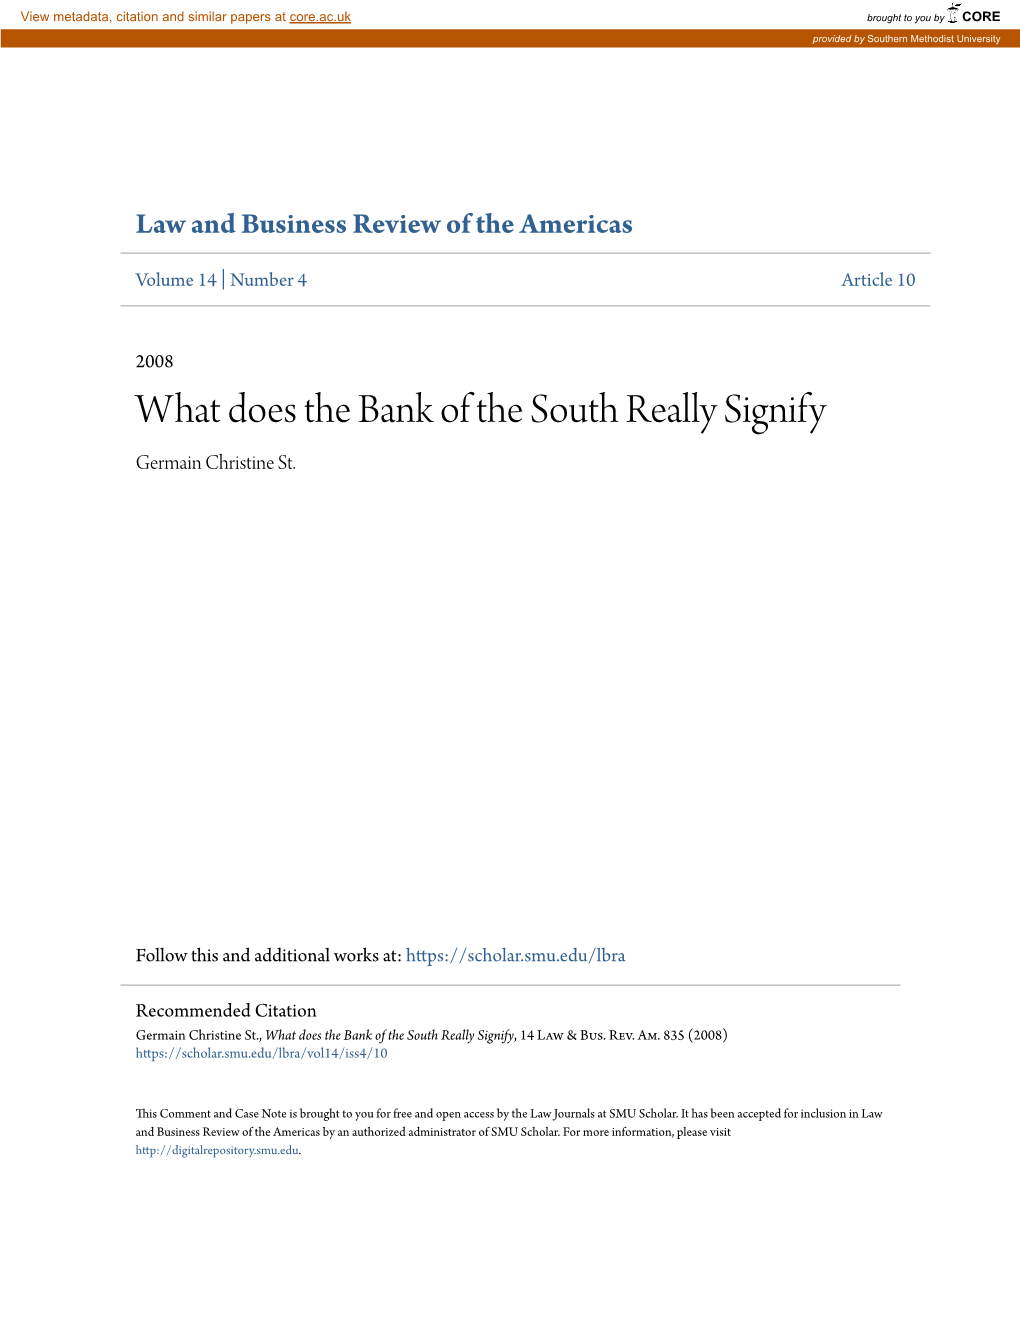 What Does the Bank of the South Really Signify Germain Christine St